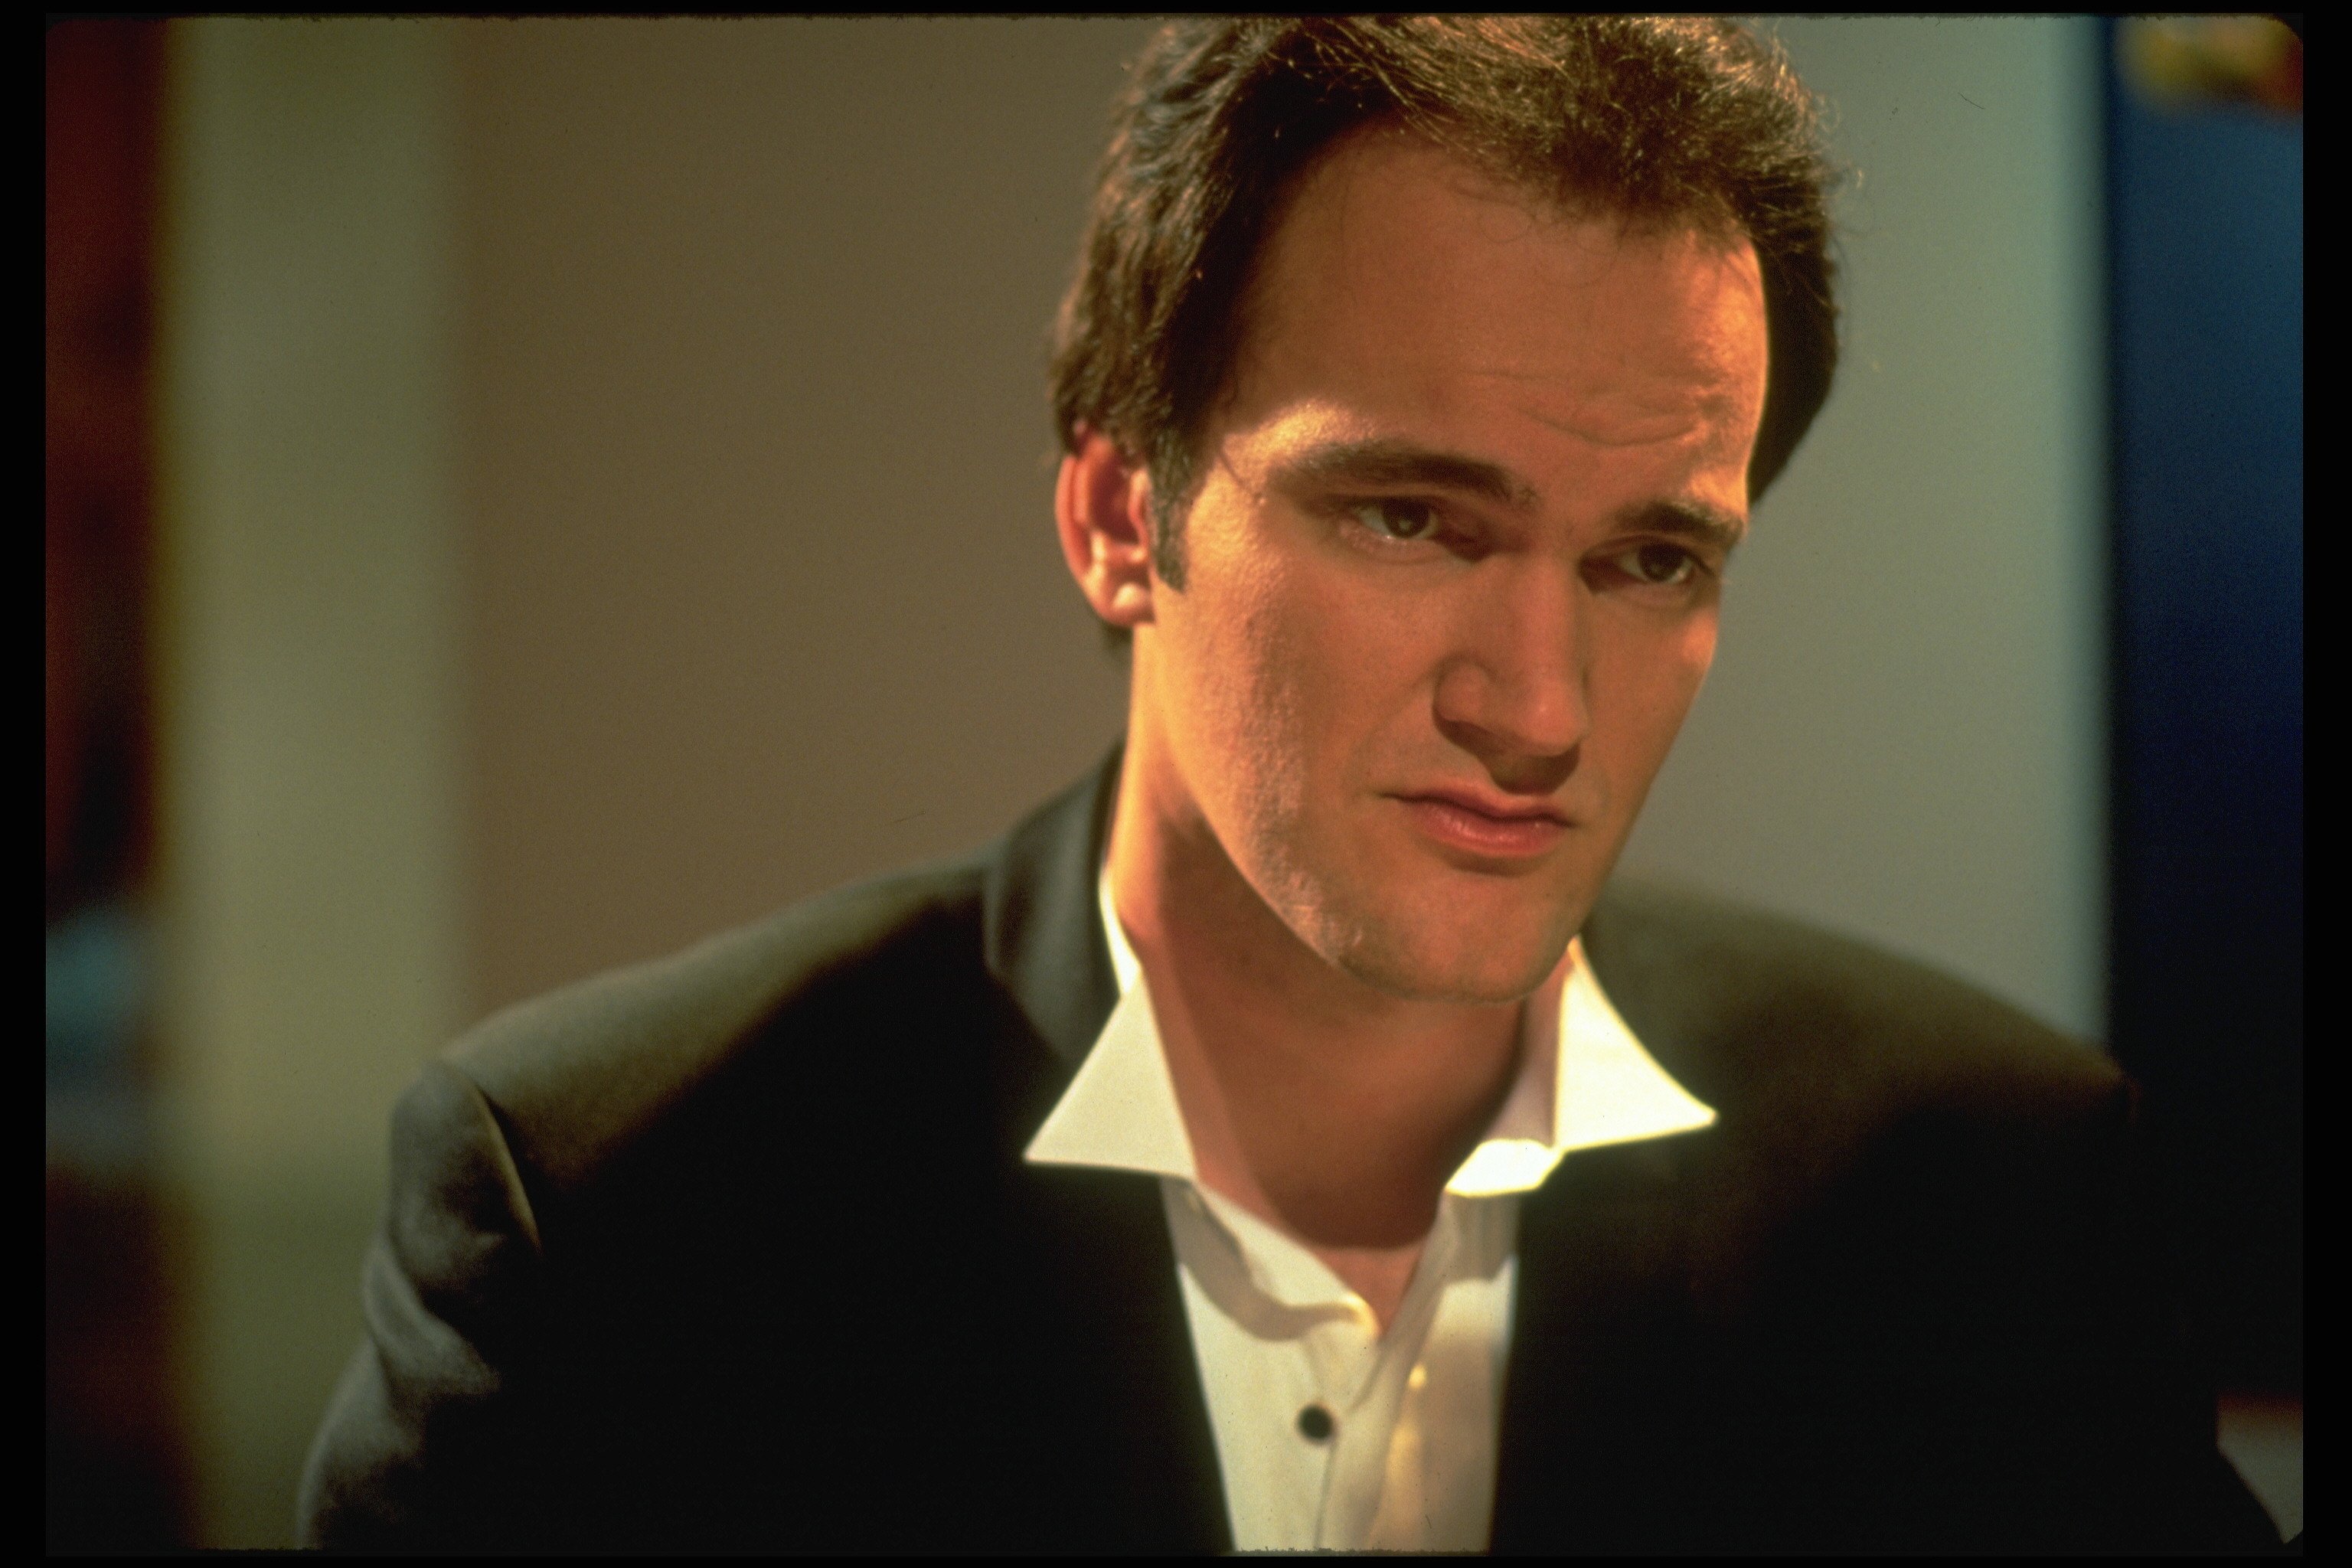 Quentin Tarantino wearing a suit around the time he made 'Pulp Fiction'